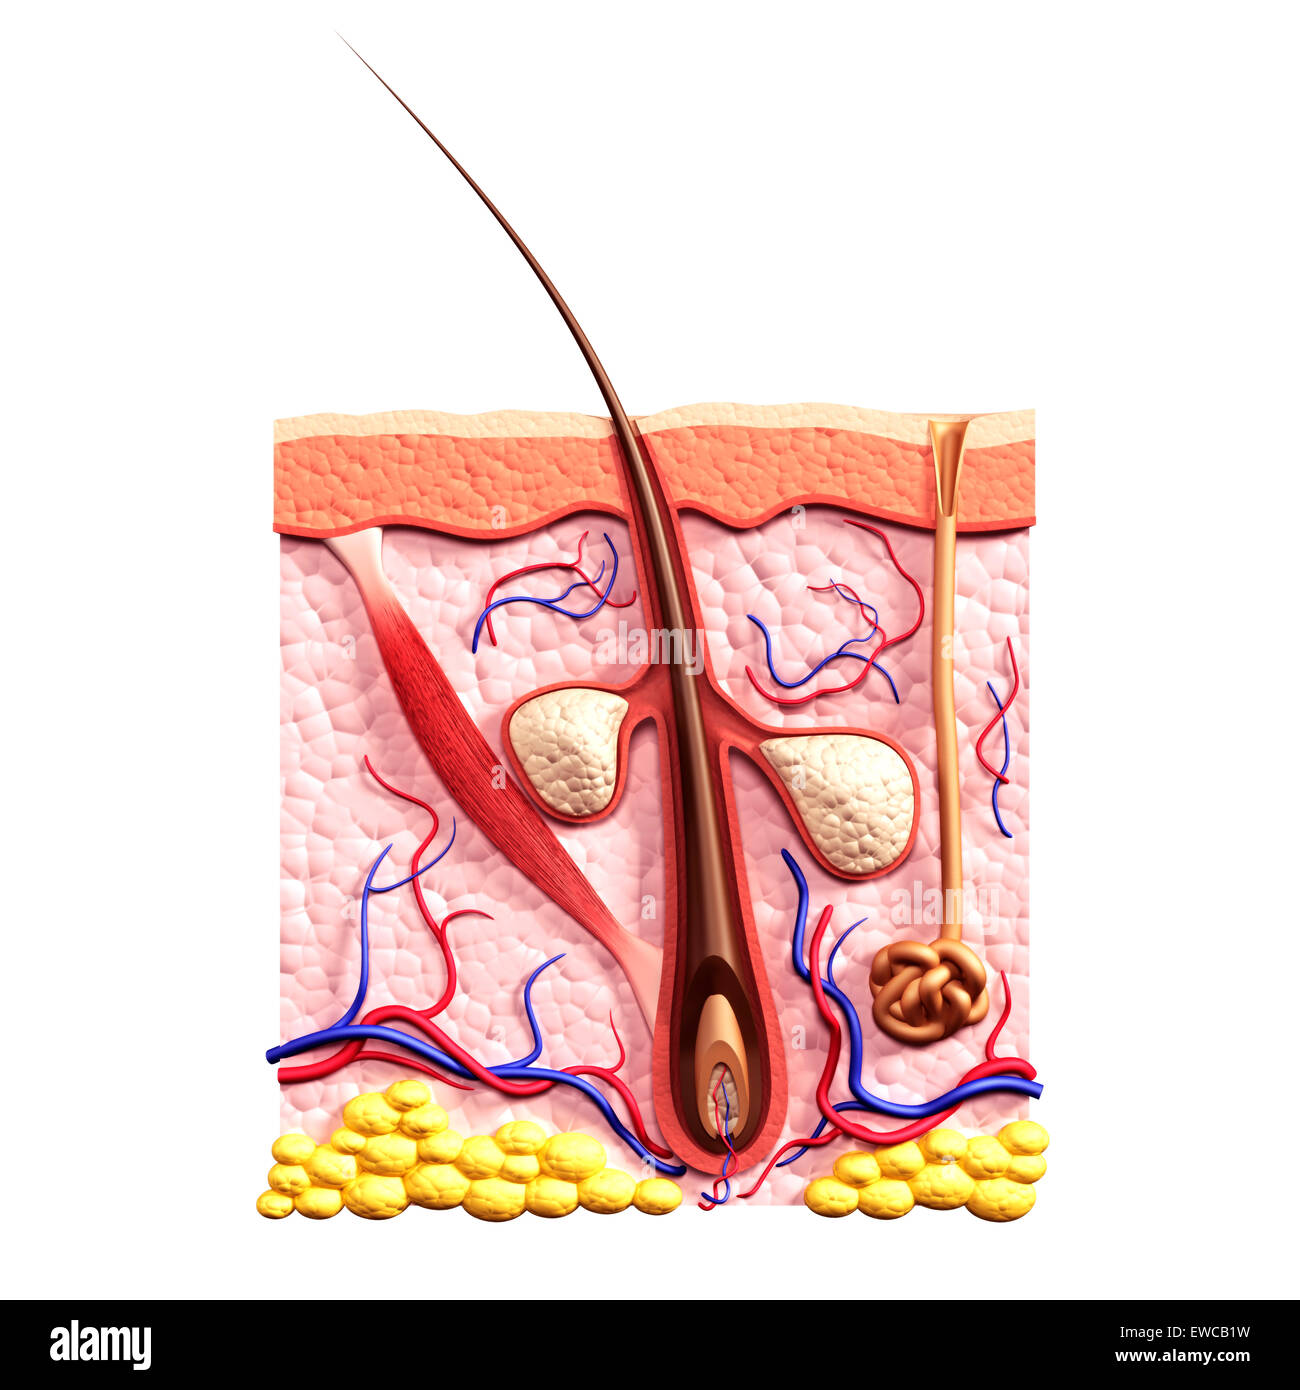 License available at MaximImages.com - Cross section of skin showing hair follicle, sebaceous glands, sweat gland and arrector pili muscle structure, Stock Photo